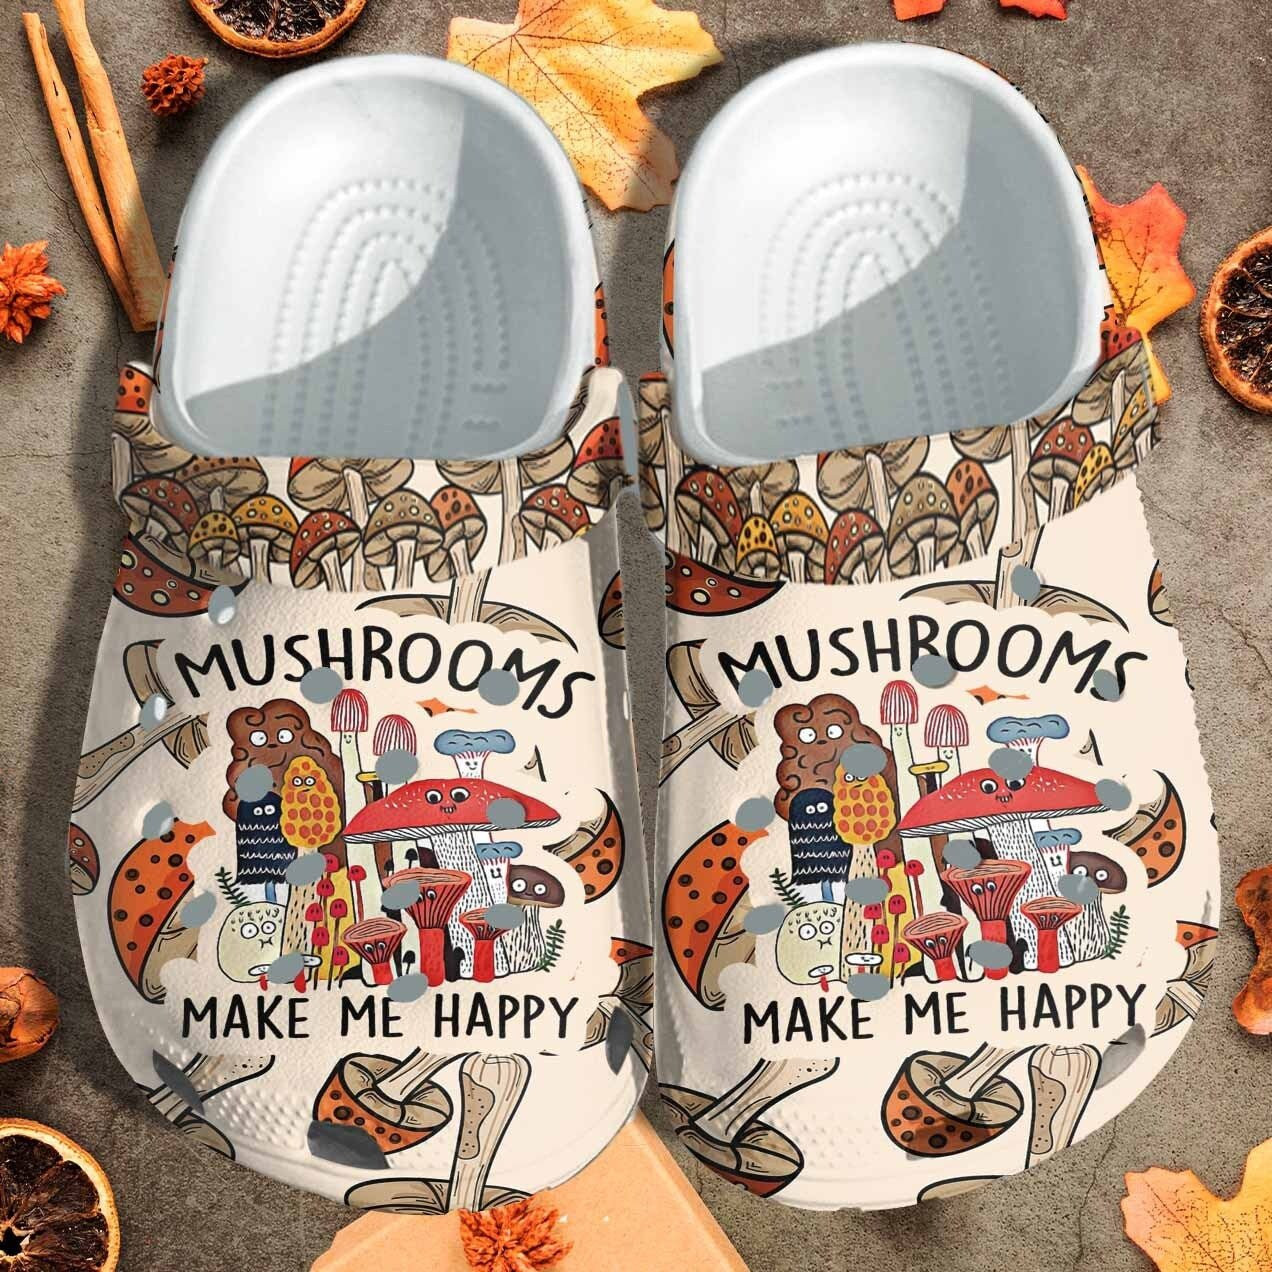 Happy Mushrooms Crocs Shoes Clogs Gift For Boy Girl – Make Me Happy Custom Crocs Shoes Clogs Birthday Gift For Son Daughter